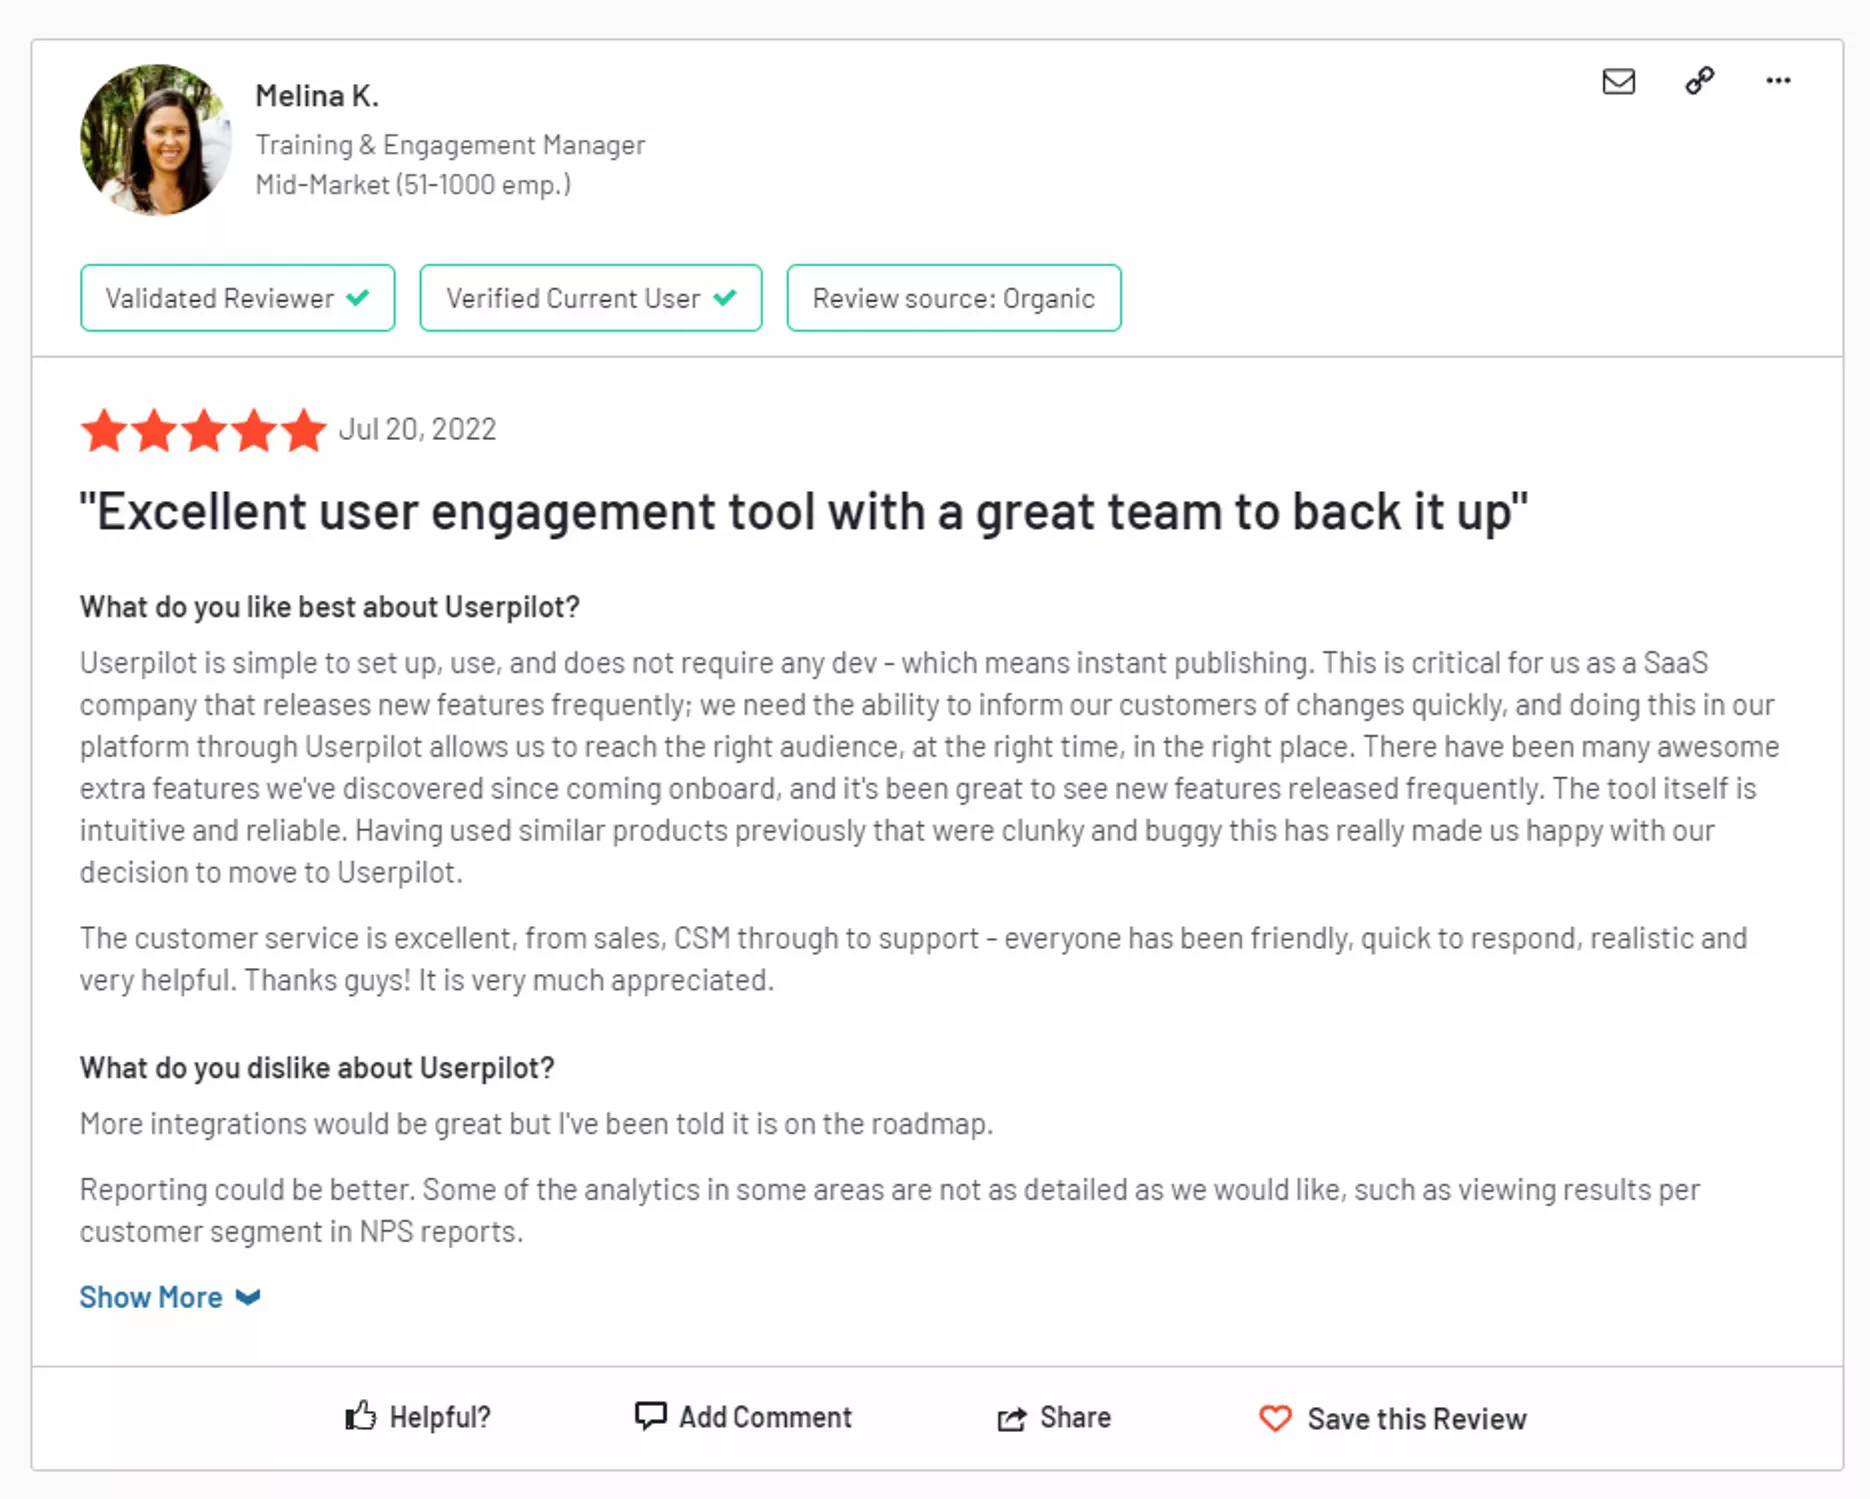 A customer review about Userpilot.